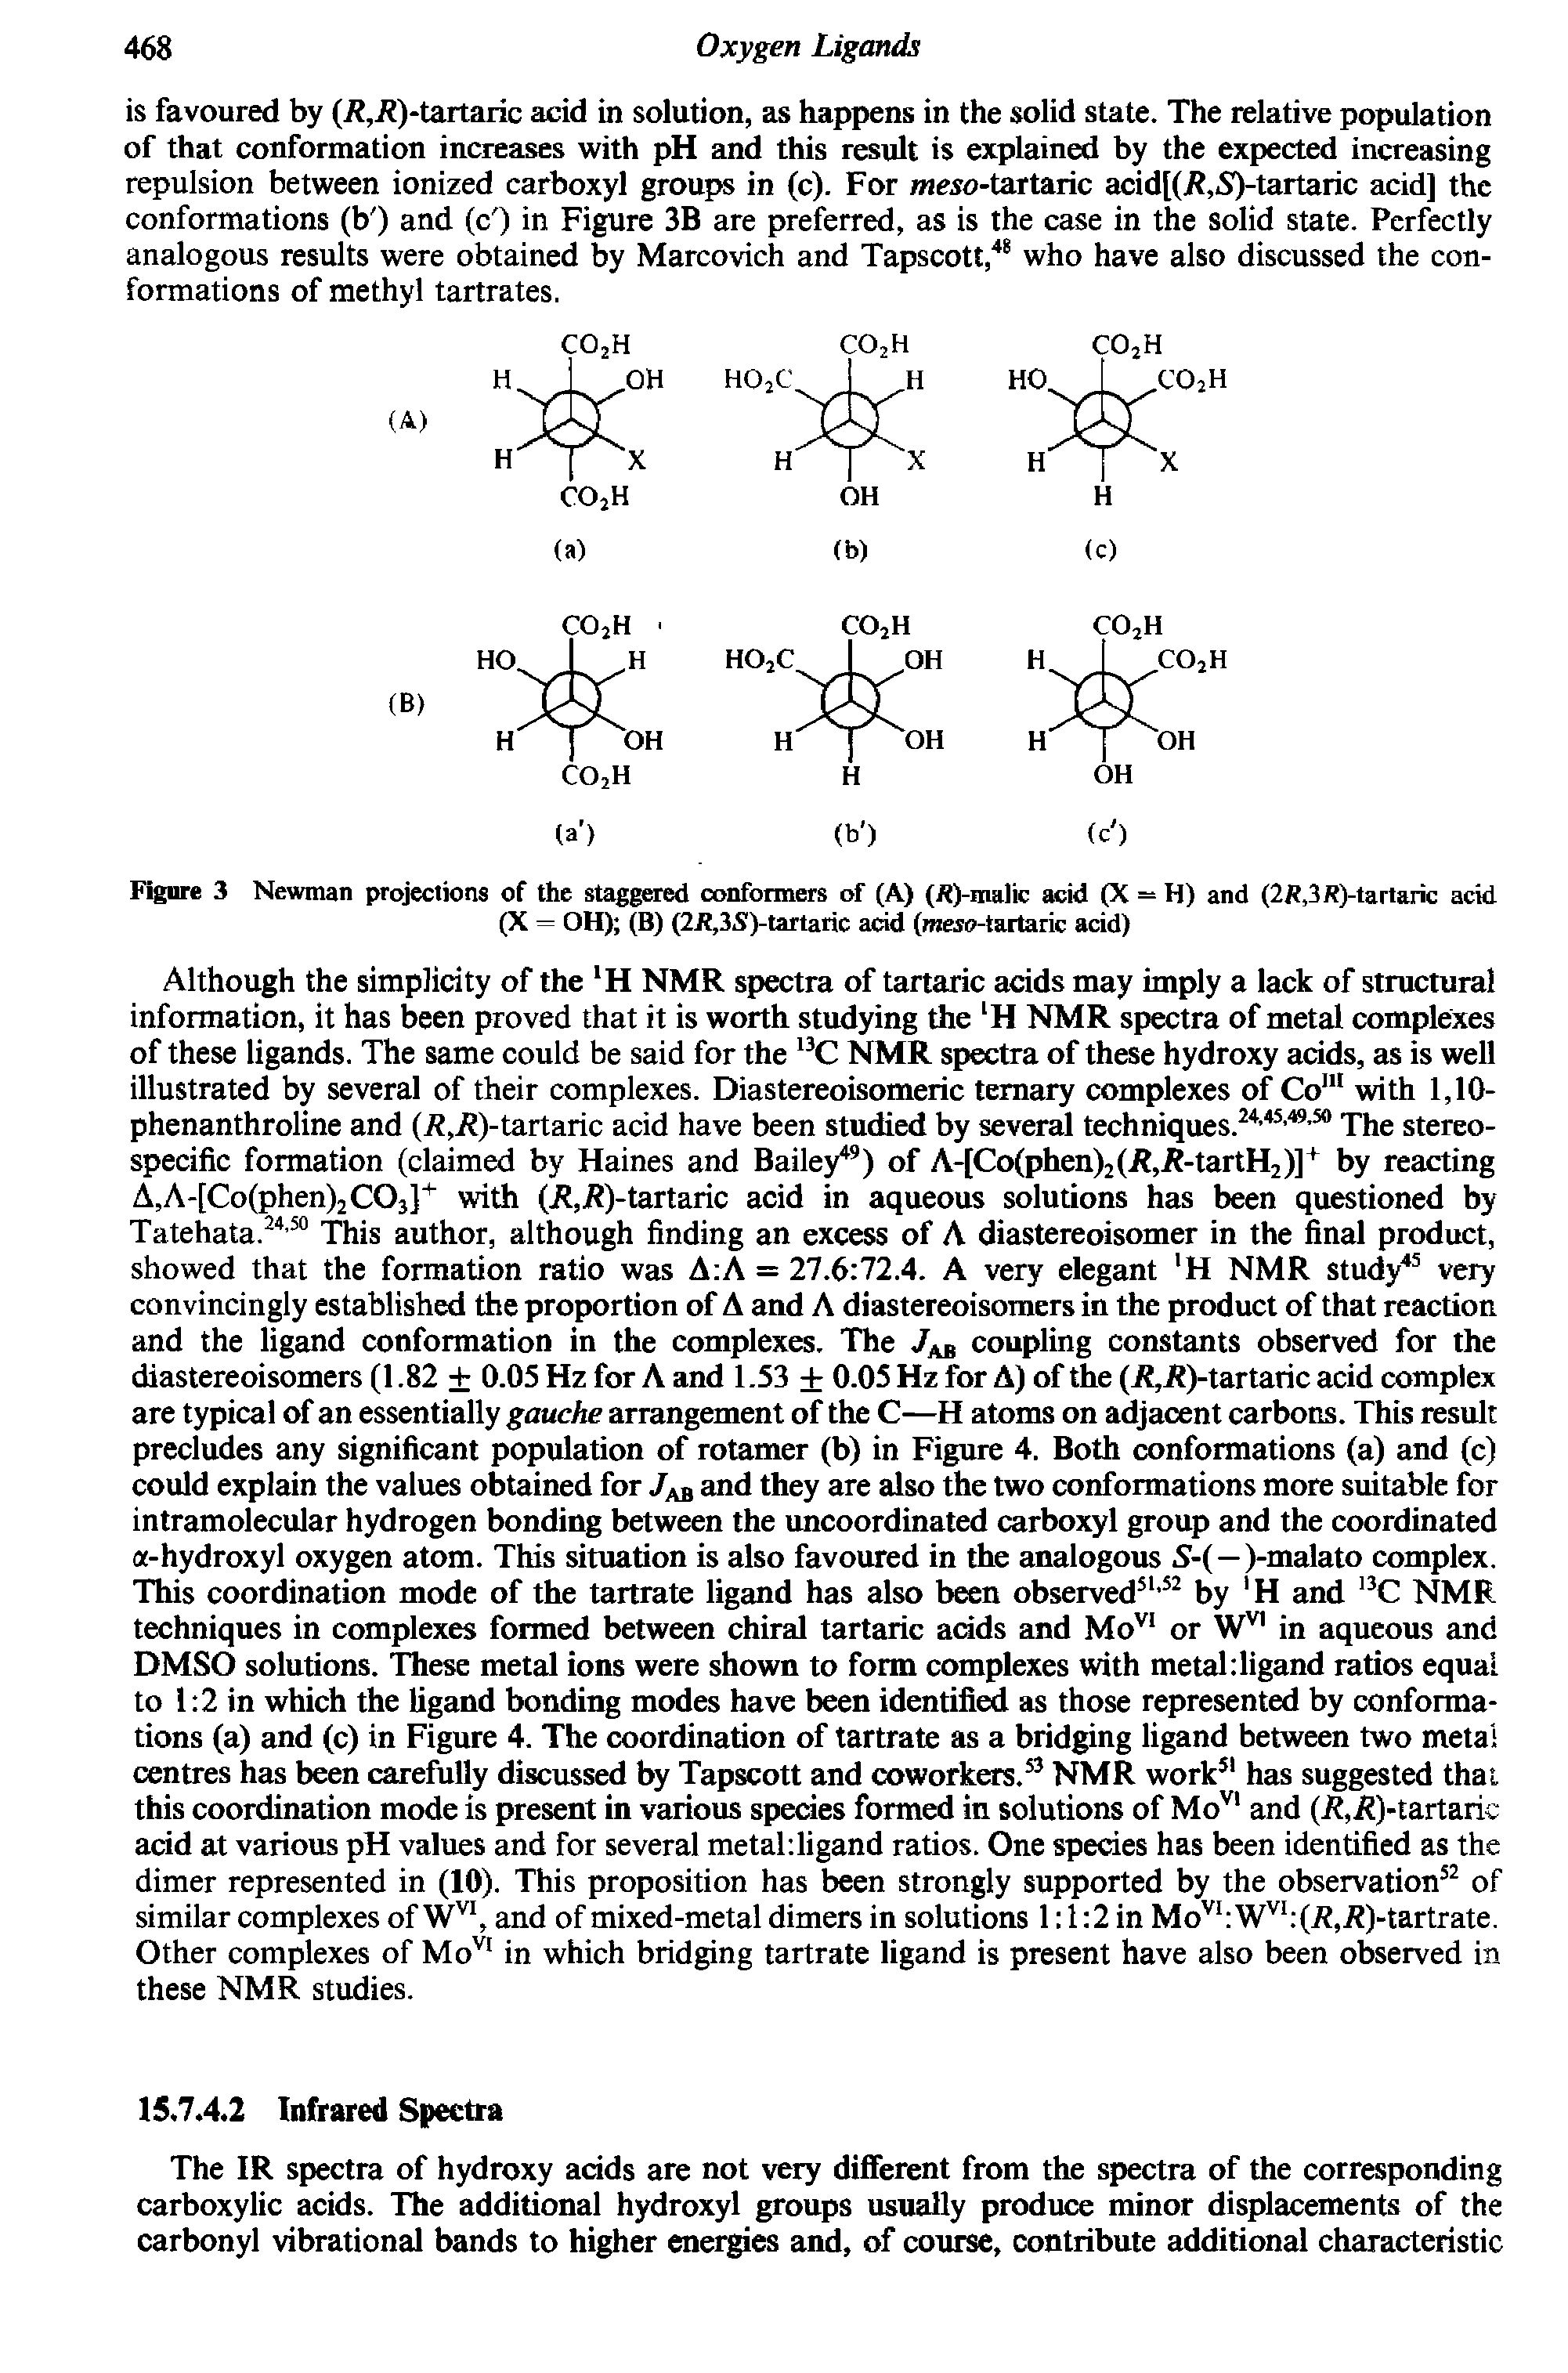 Figure 3 Newman projections of the staggered conformers of (A) (ft)-malic acid (X = H) and (2R,3R)-tartaric acid...